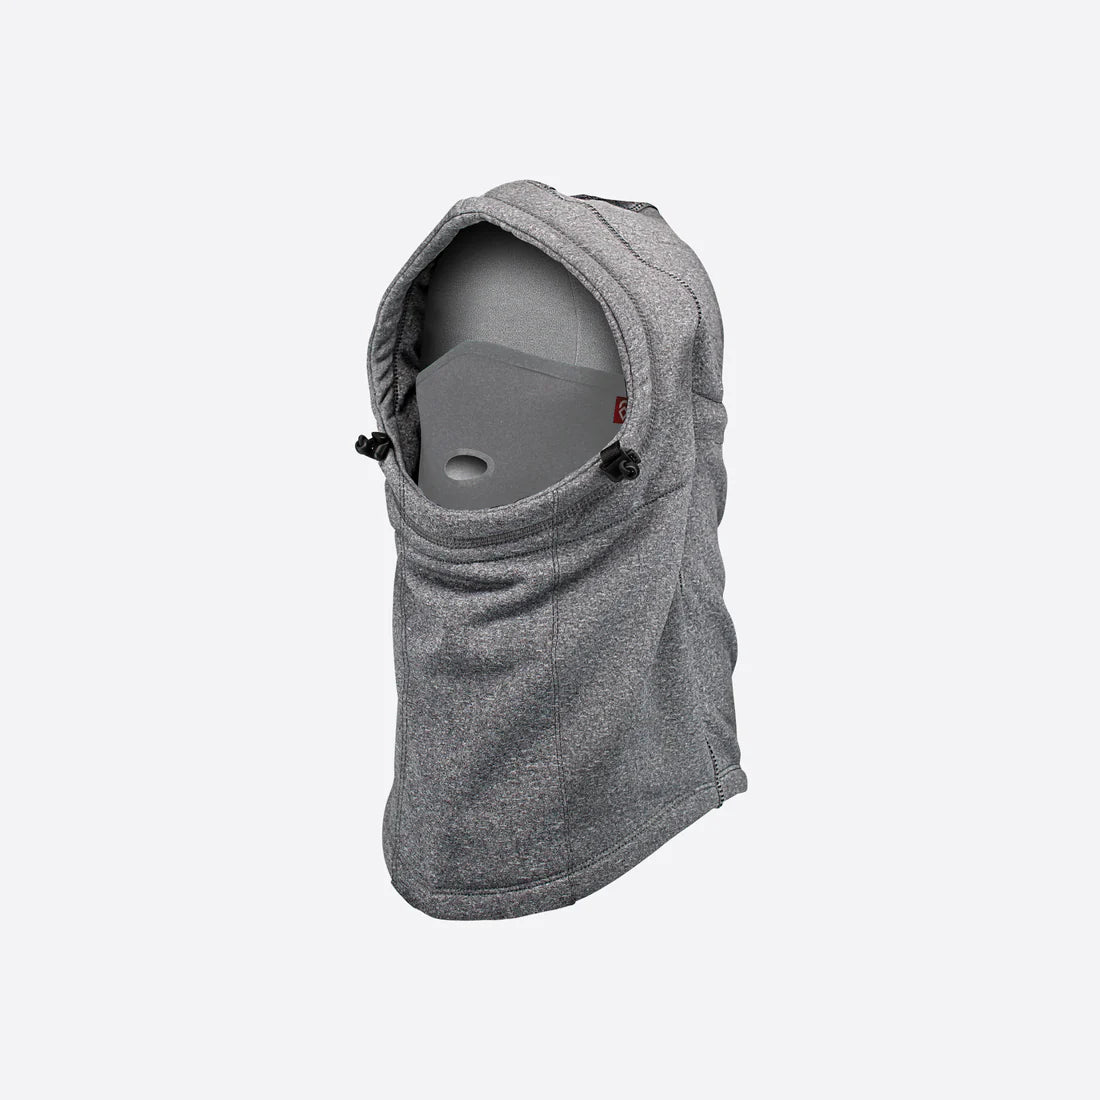 Airhole Airhood Pullover snowboard Facemask